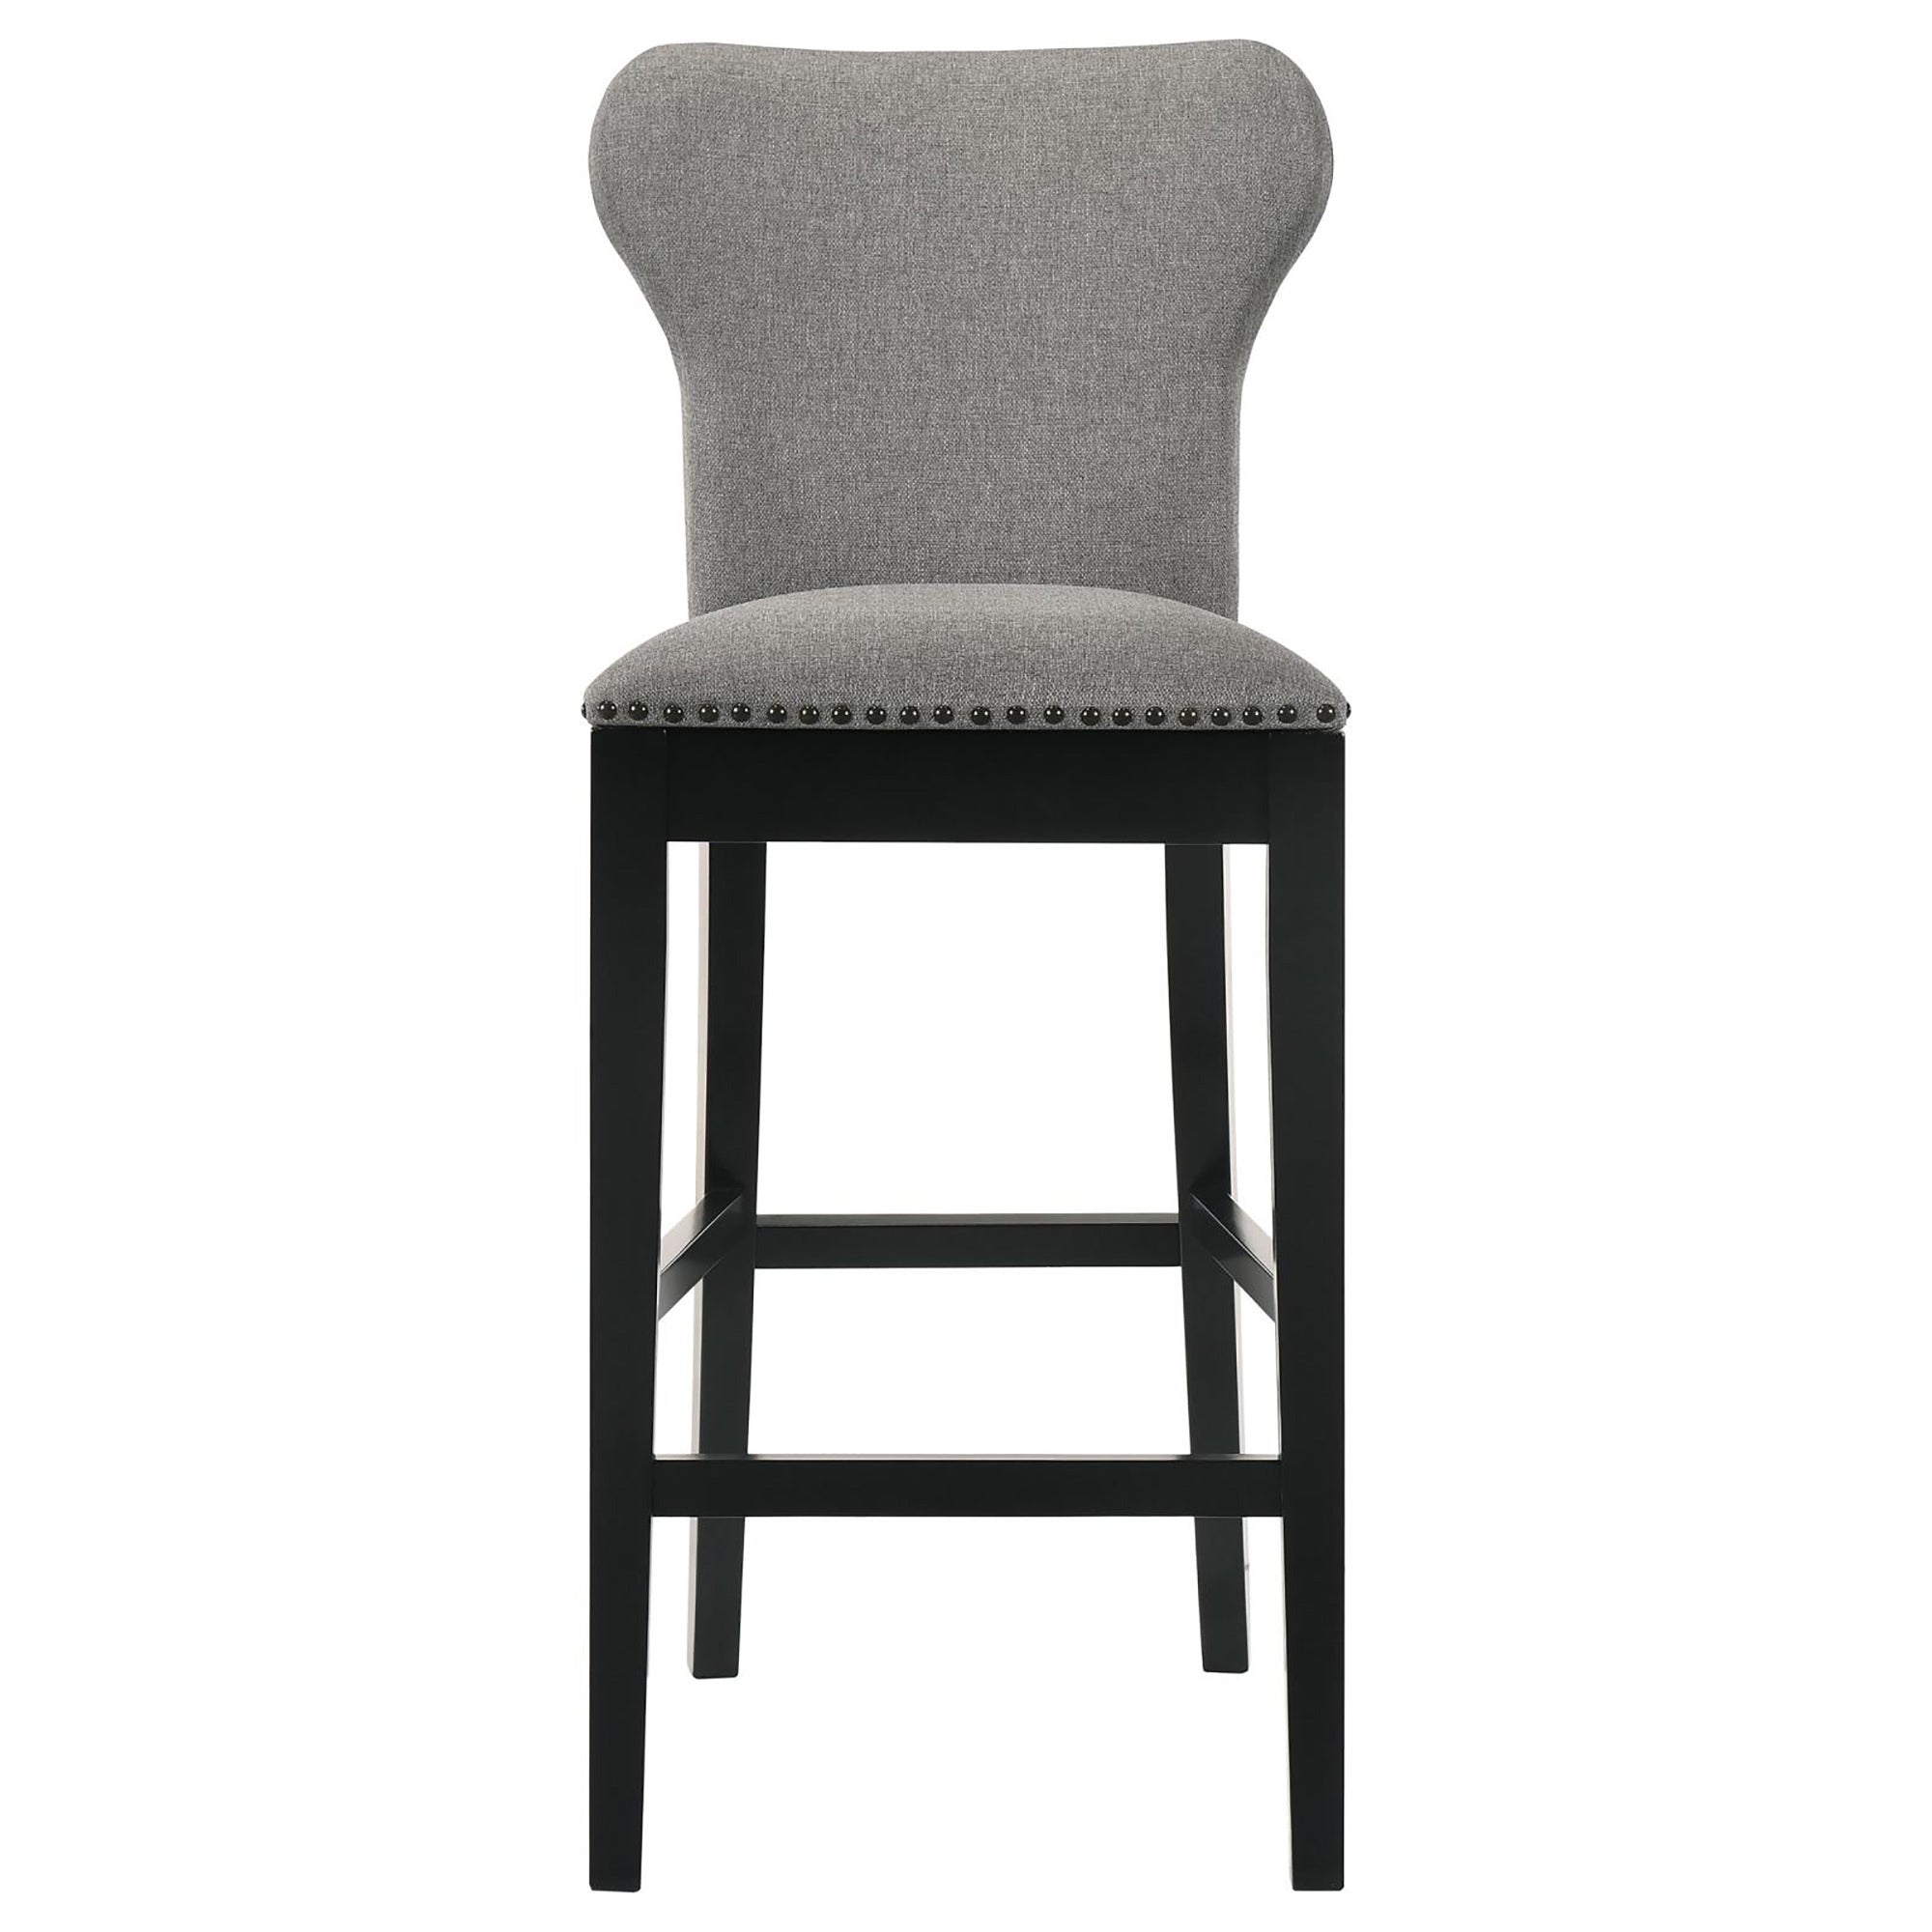 Grey and Black Stool with Nailhead Trim Set of 2 grey-dining room-wipe clean-transitional-bar